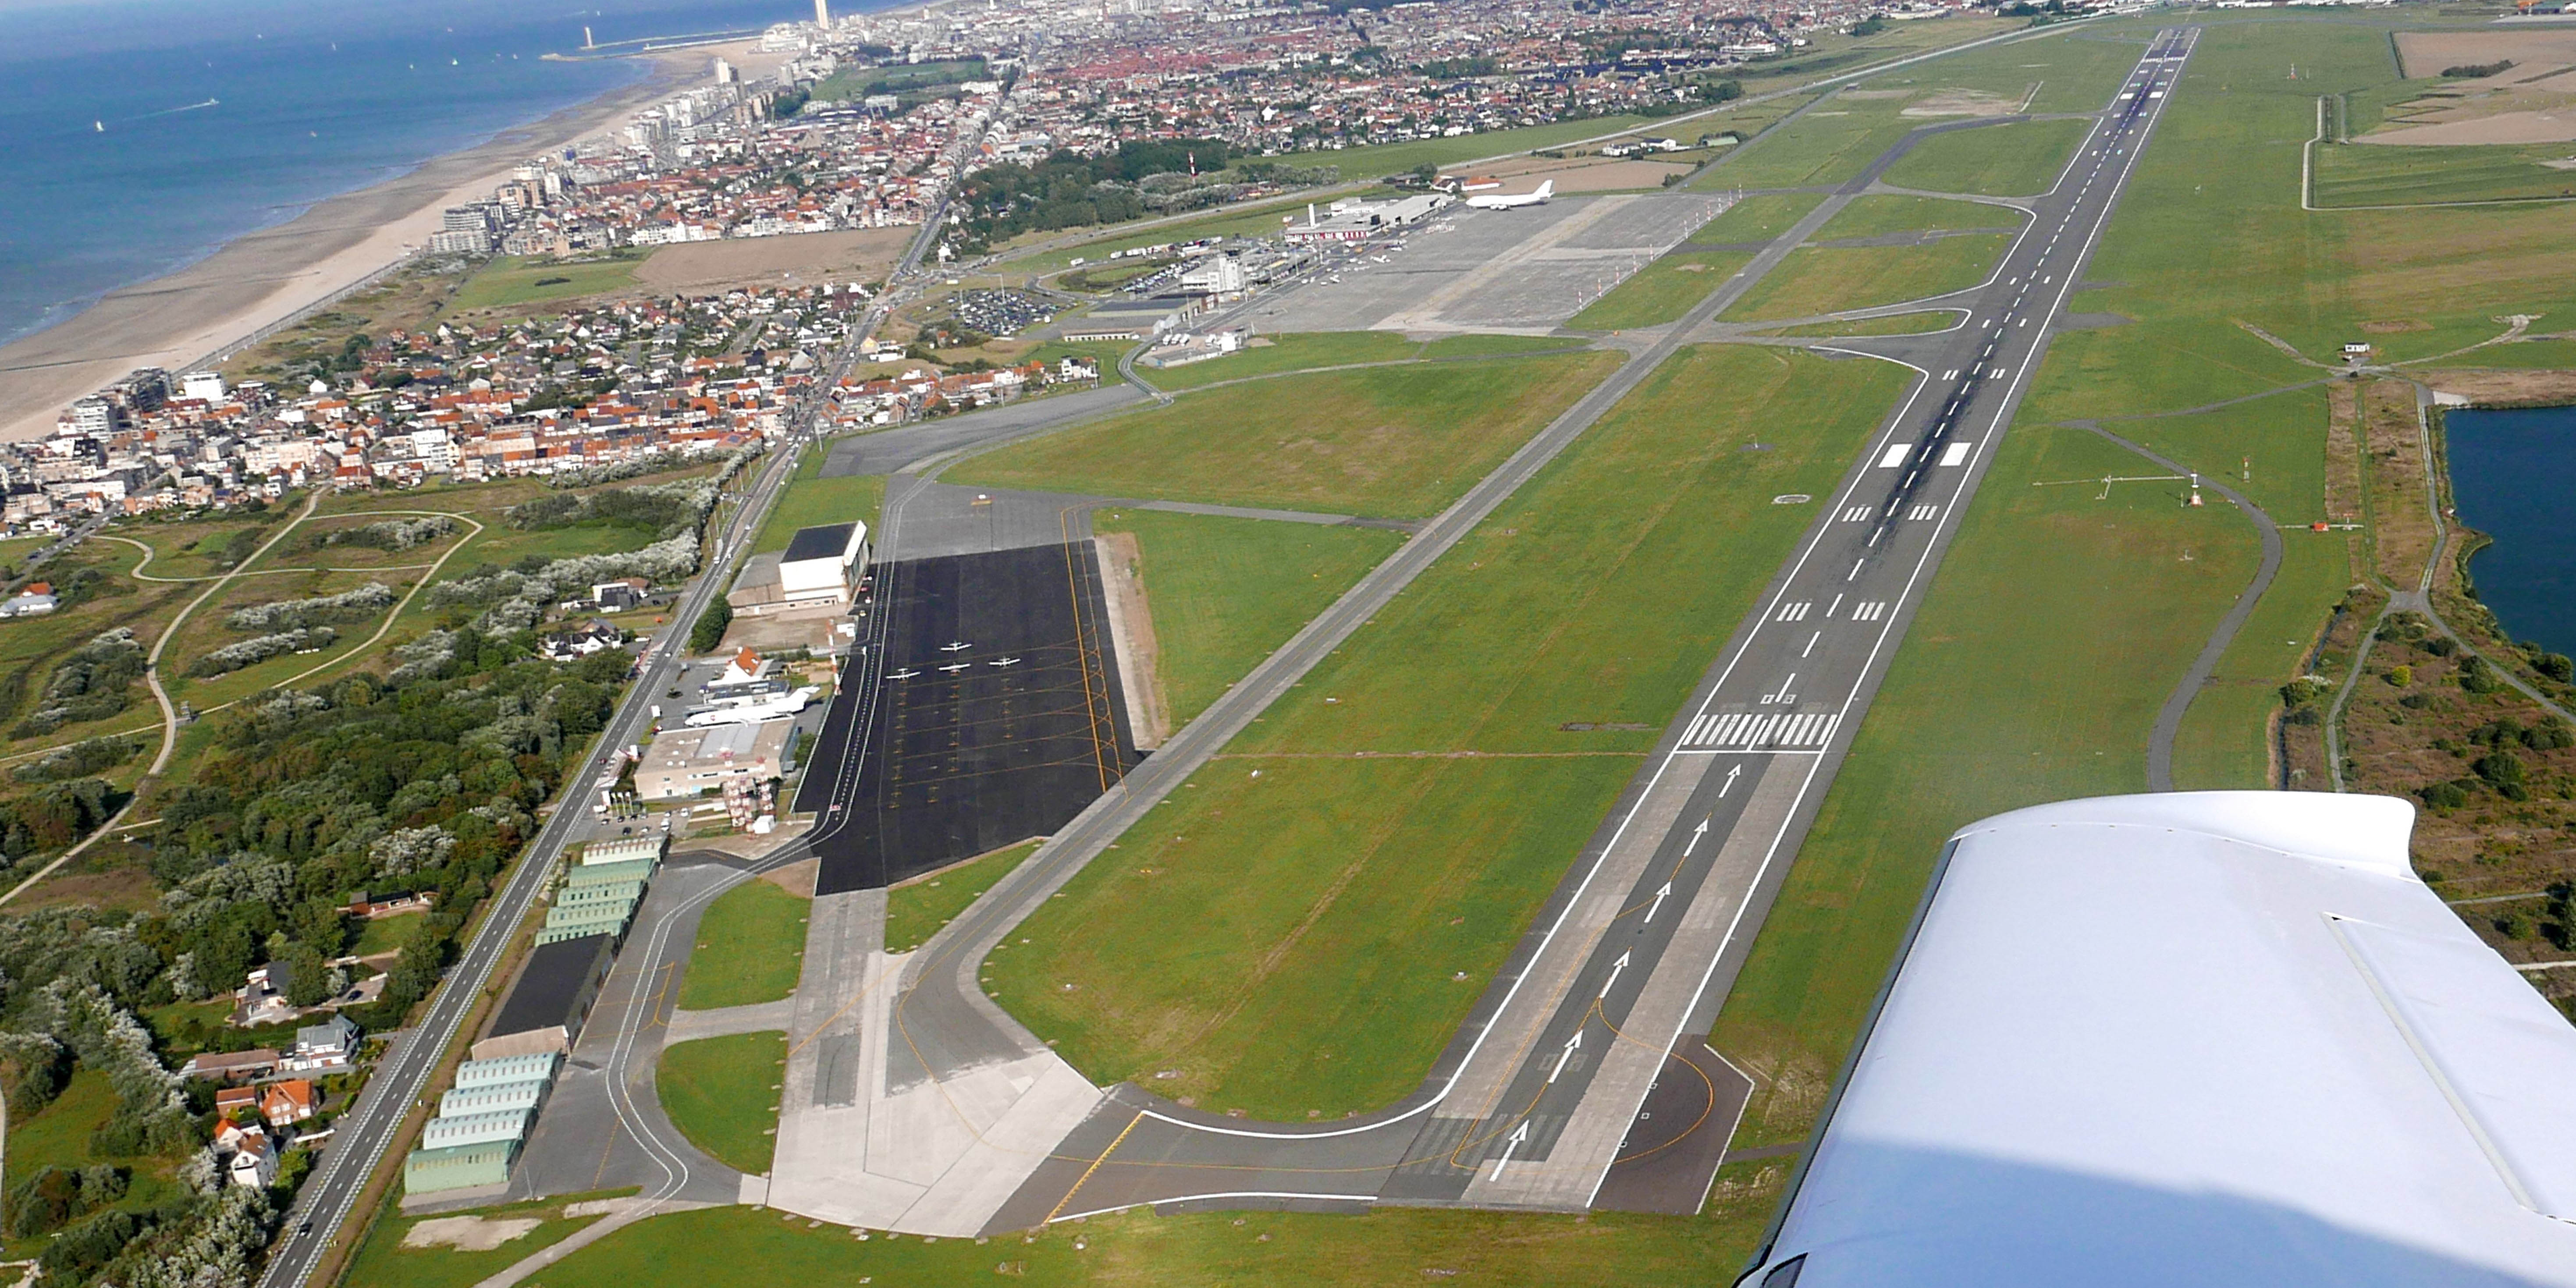 Case study: reduced CO2 emissions at the Ostend-Bruges airport